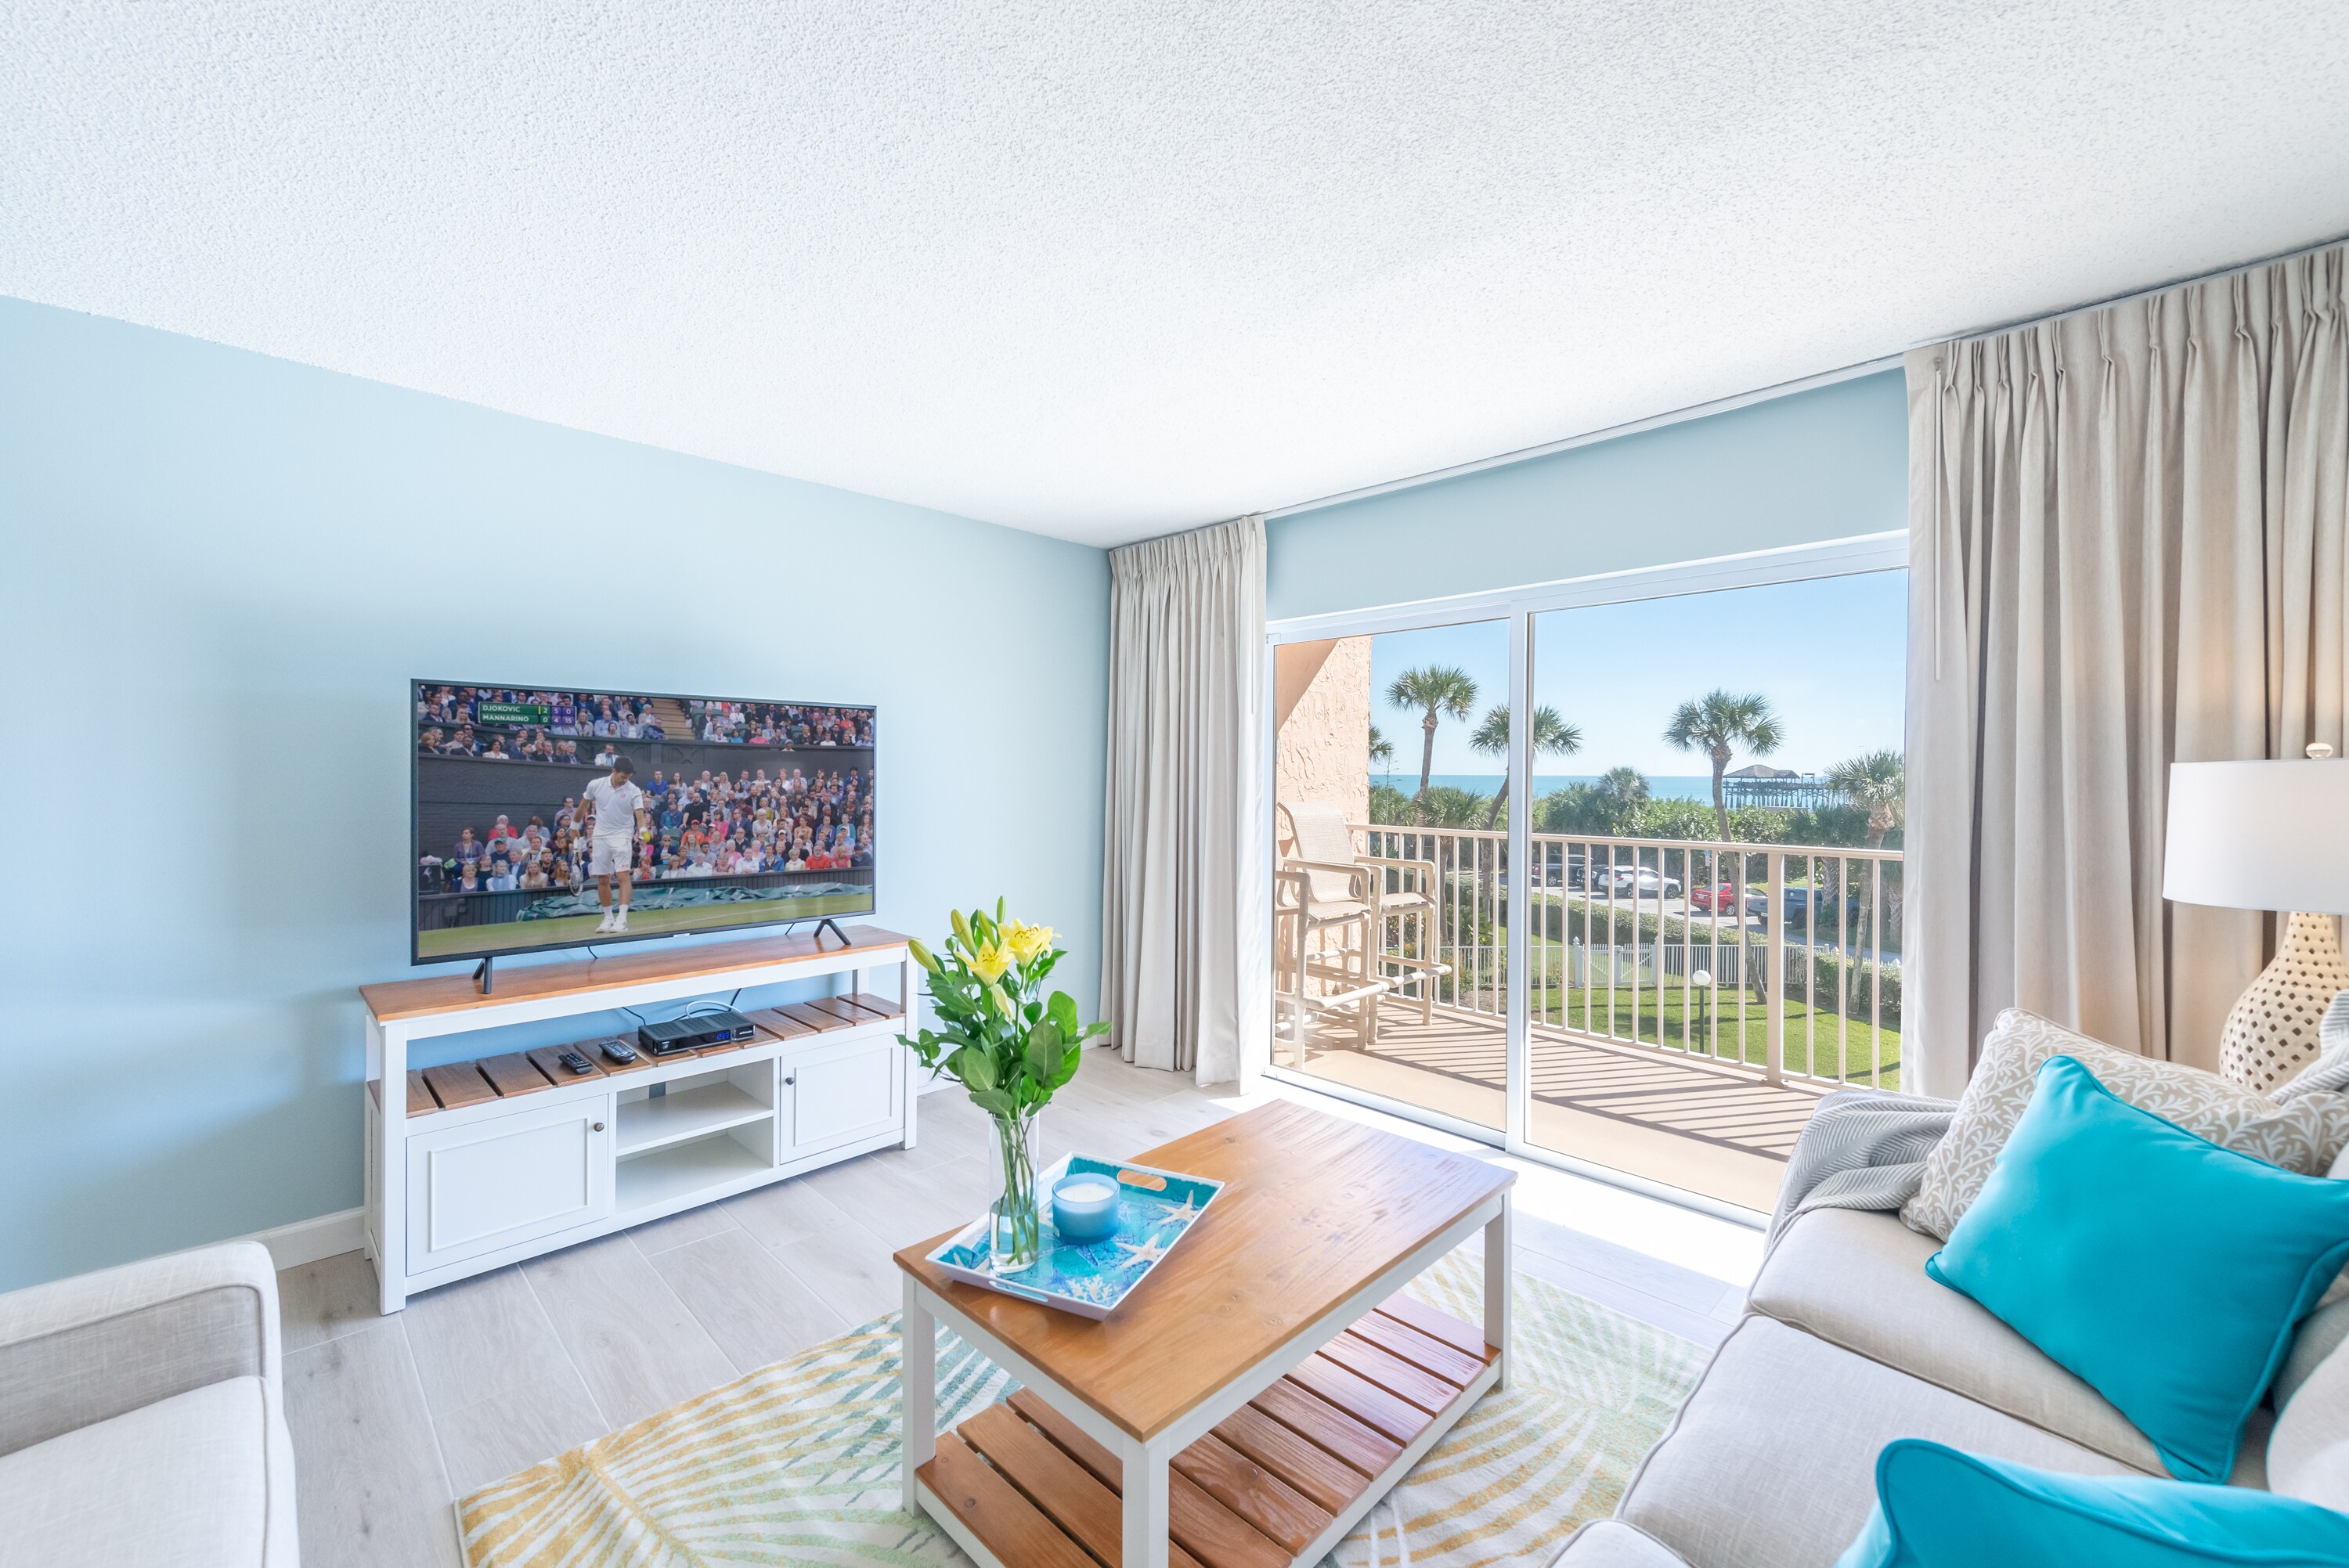 Big screen TV and a view of the ocean. Walk right out to the patio.